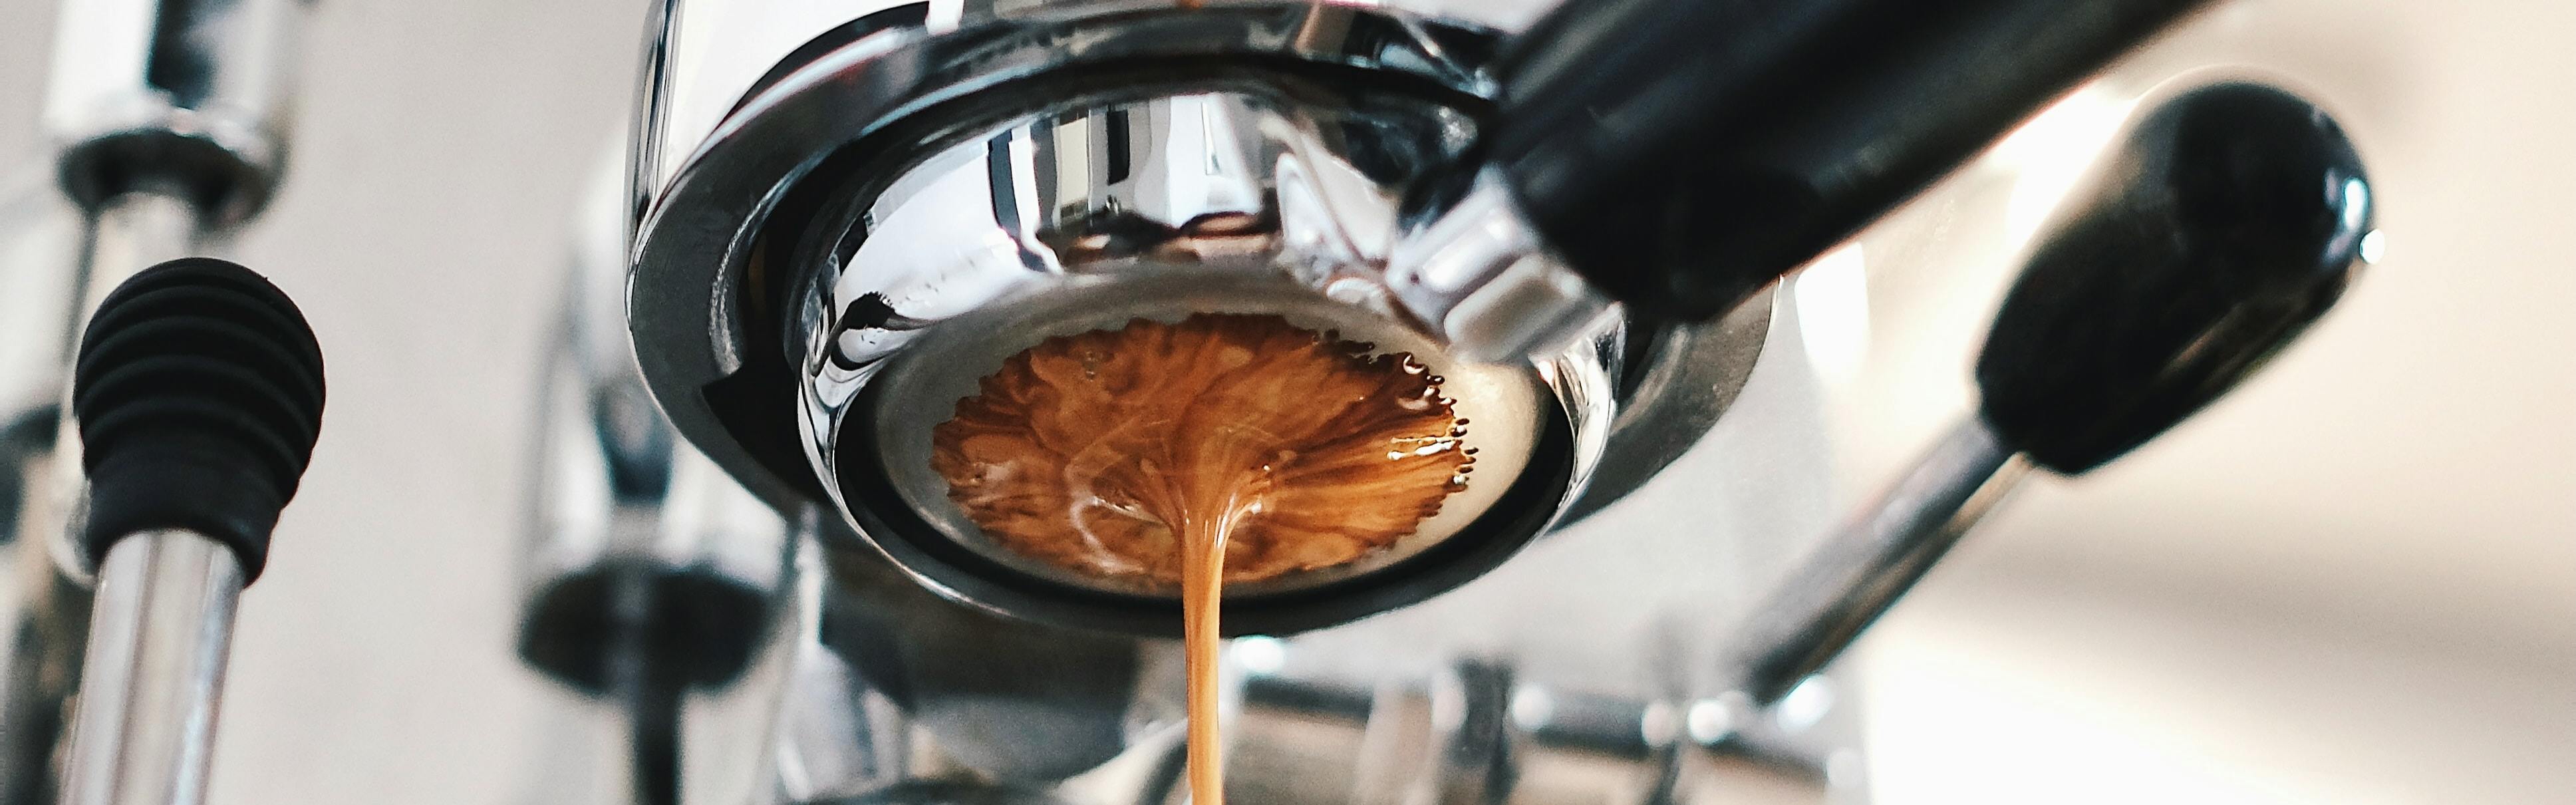 Coffee being brewed by the machine flowing through portafilter